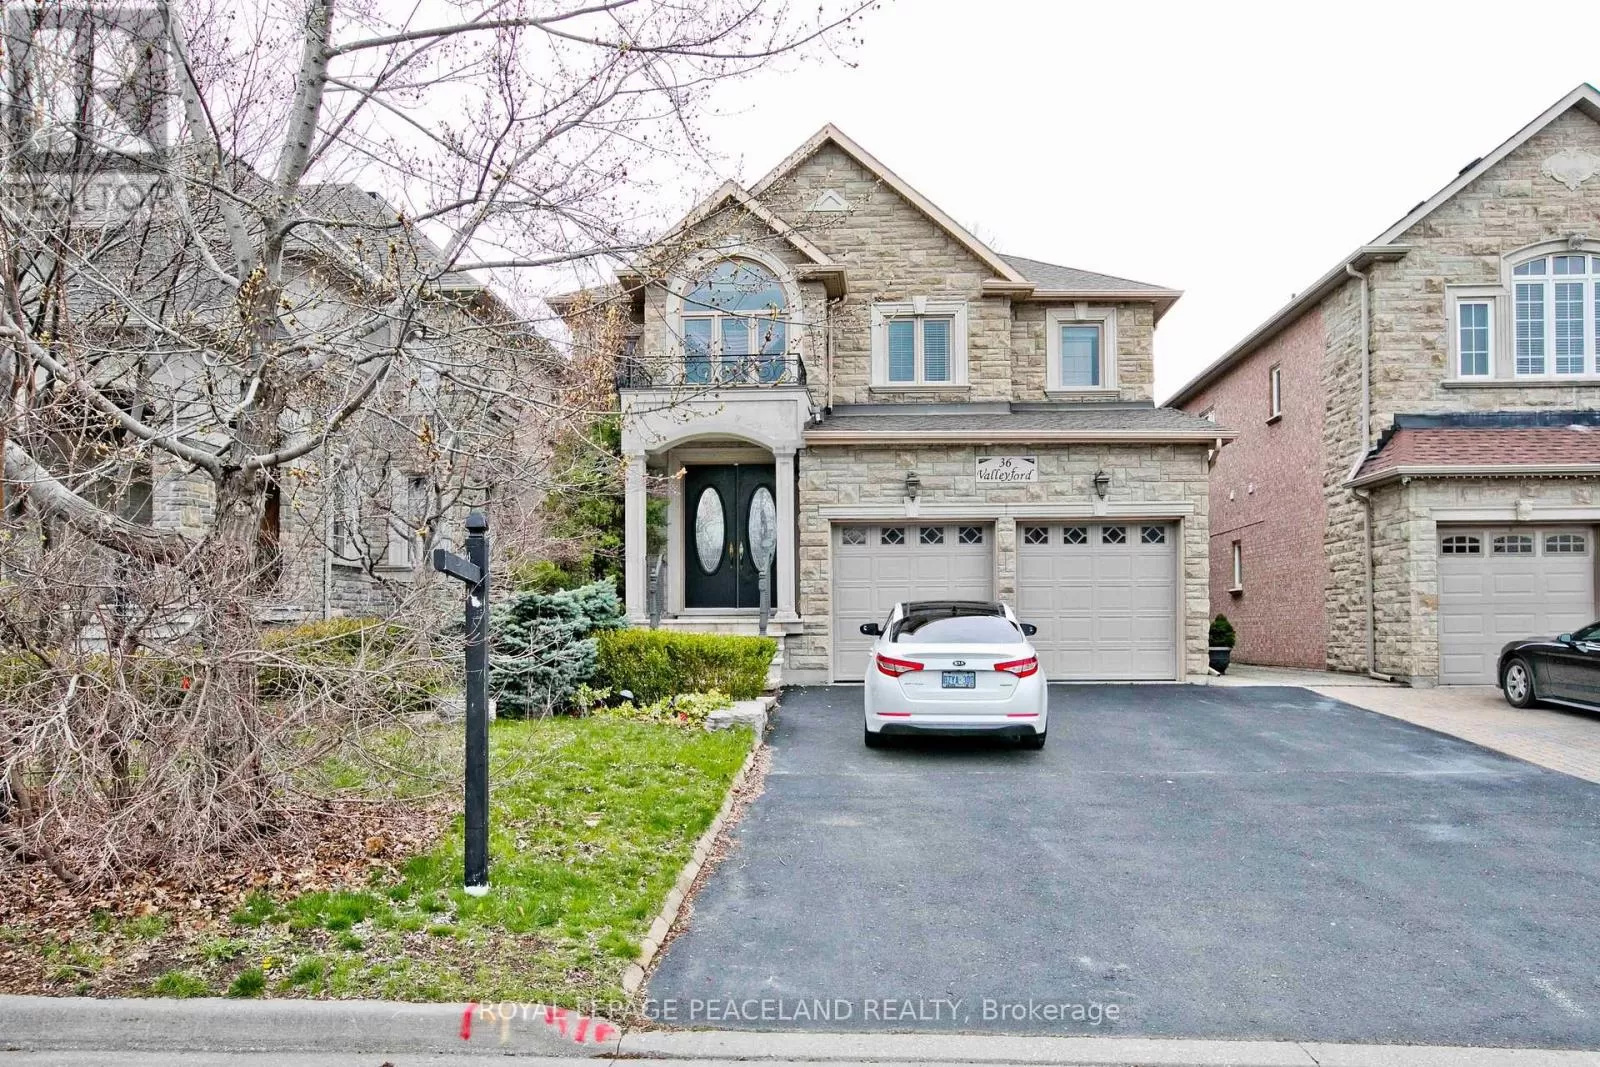 House for rent: 36 Valleyford Avenue, Richmond Hill, Ontario L4C 0A7